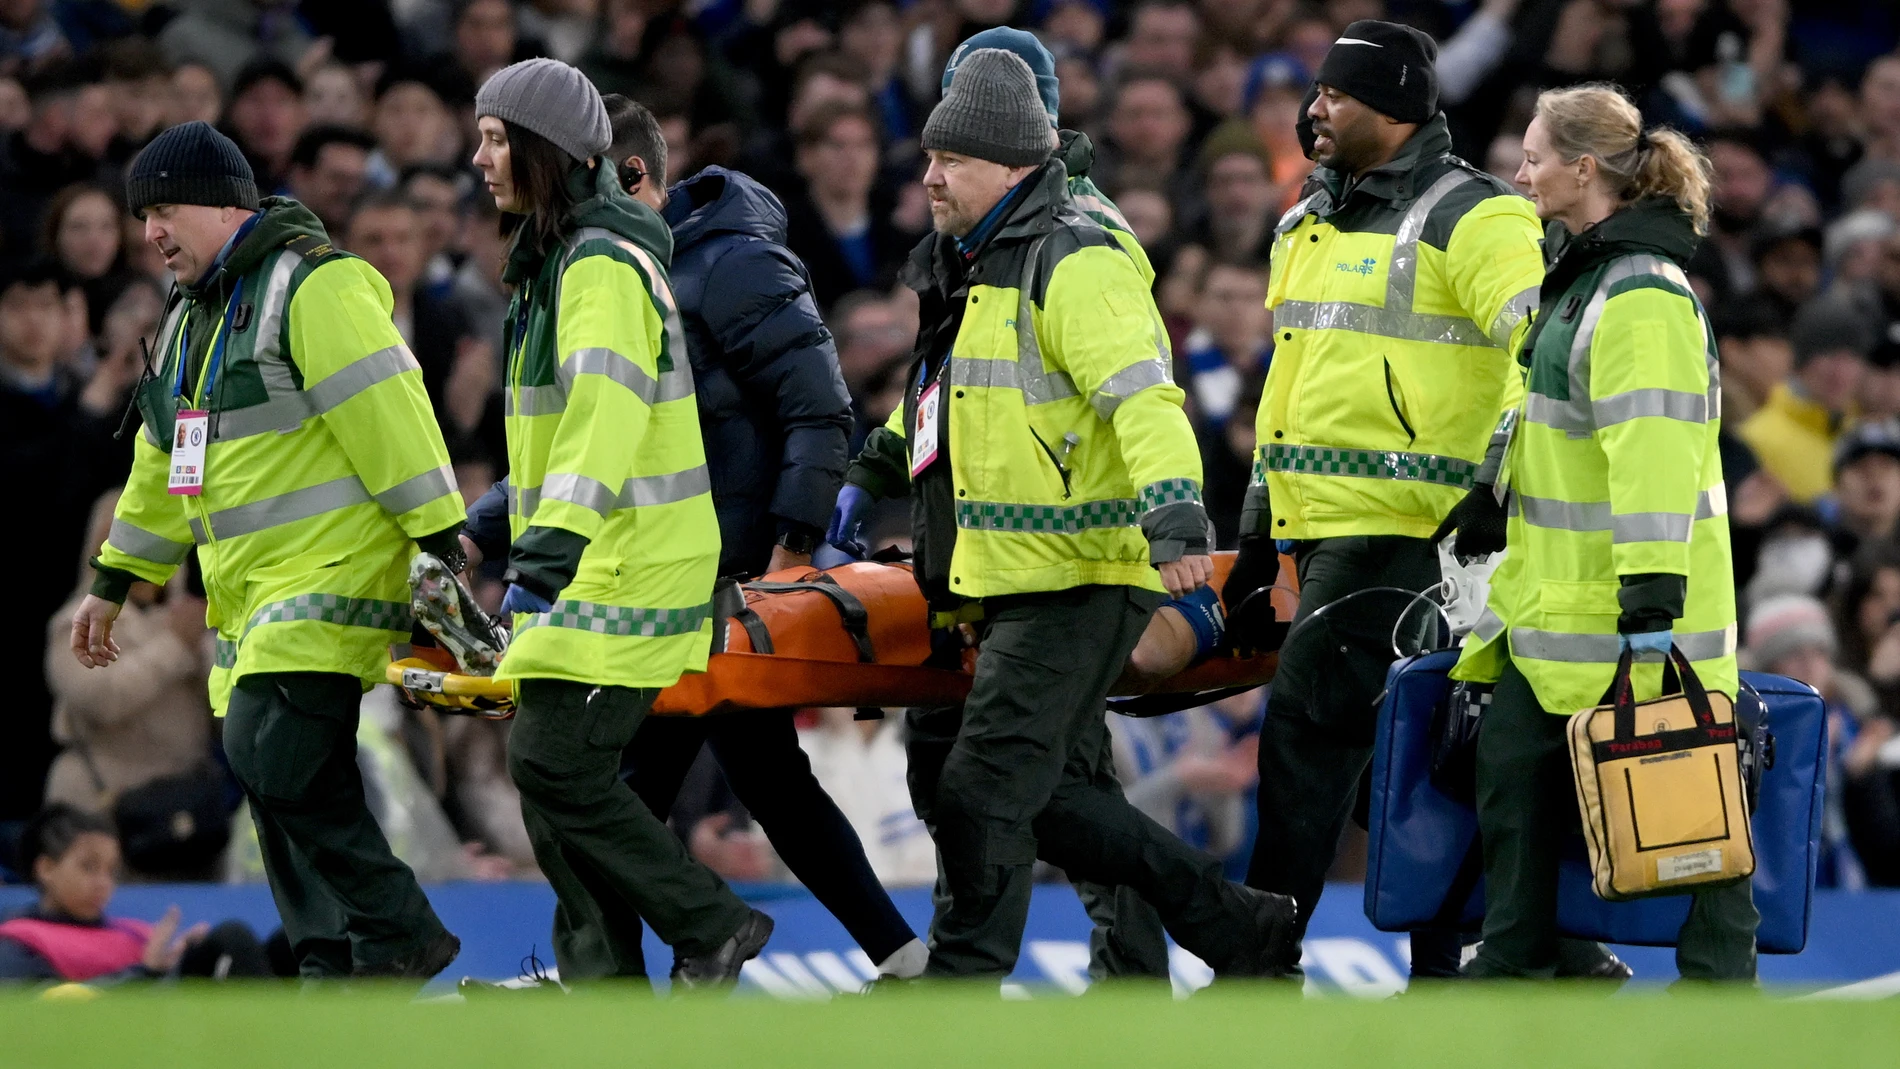 London (United Kingdom), 18/02/2023.- Cesar Azpilicueta of Chelsea is stretchered off during the English Premier League soccer match between Chelsea FC and Southampton FC in London, Britain, 18 February 2023. (Reino Unido, Londres) EFE/EPA/Daniel Hambury EDITORIAL USE ONLY. No use with unauthorized audio, video, data, fixture lists, club/league logos or 'live' services. Online in-match use limited to 120 images, no video emulation. No use in betting, games or single club/league/player publications 